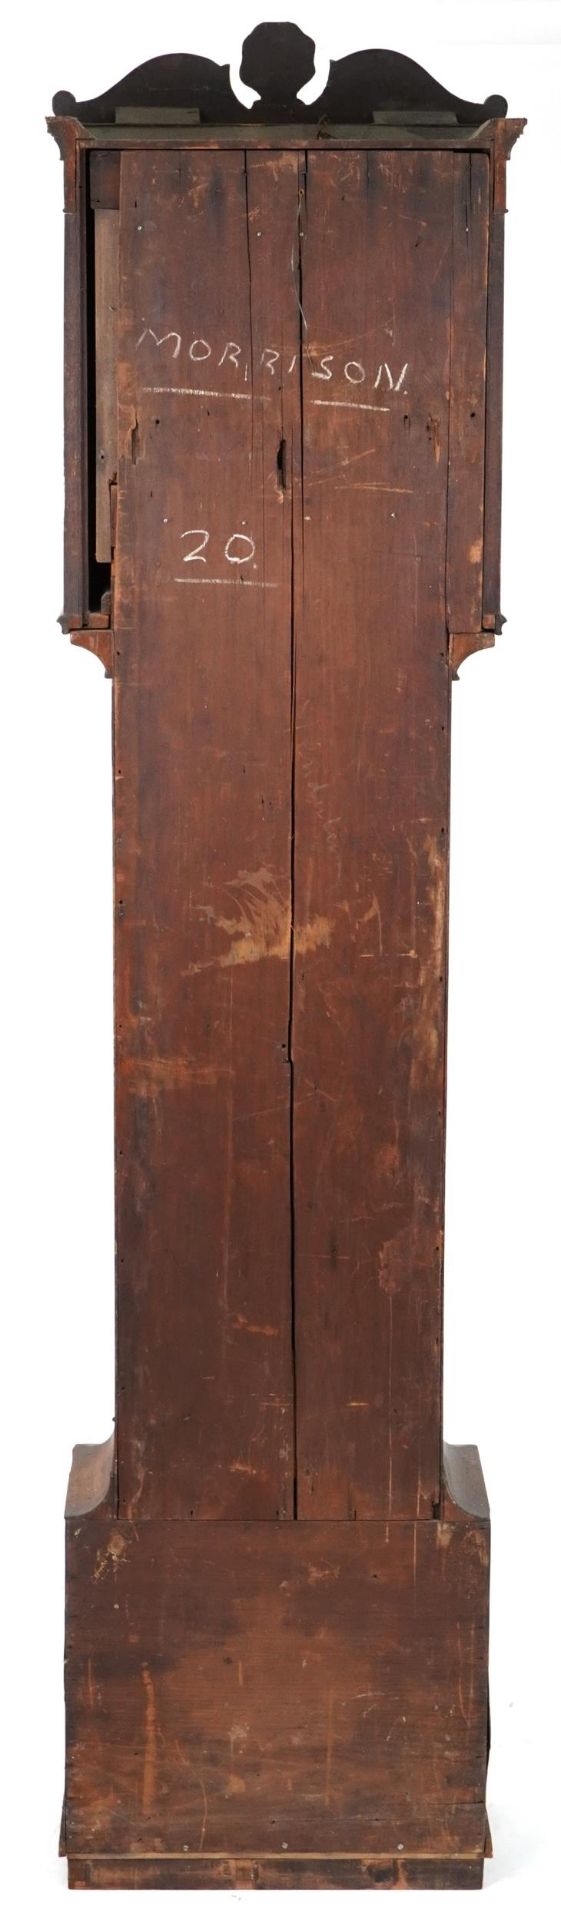 Antique mahogany grandfather clock with painted dial having Roman numerals and two subsidiary dials, - Image 3 of 4